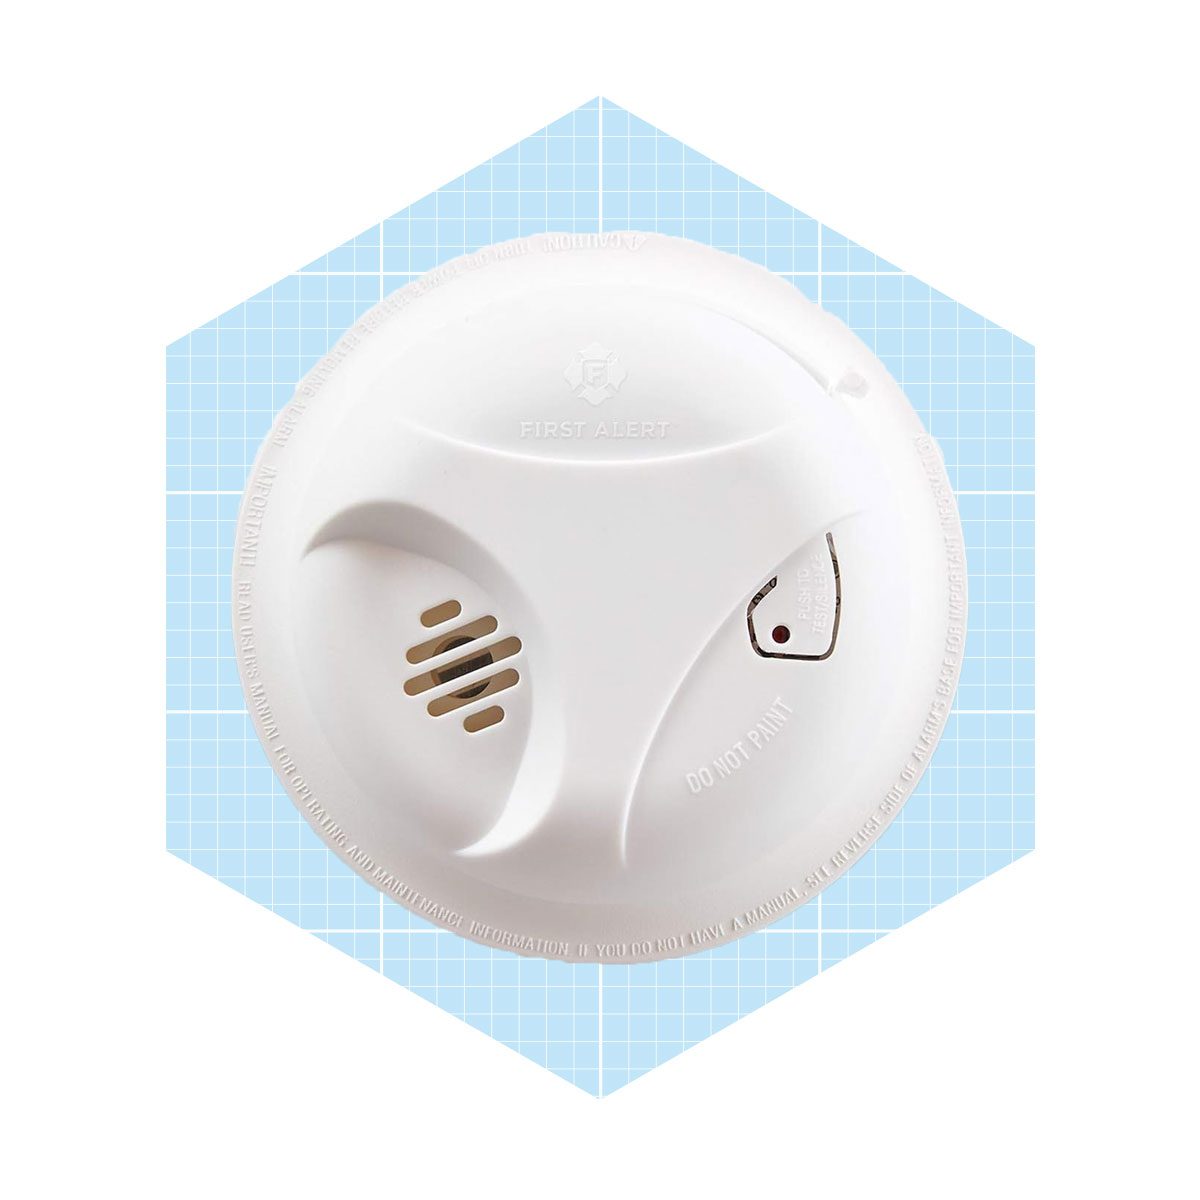 Battery Powered Ionization Smoke Alarm with Test/Silence Button